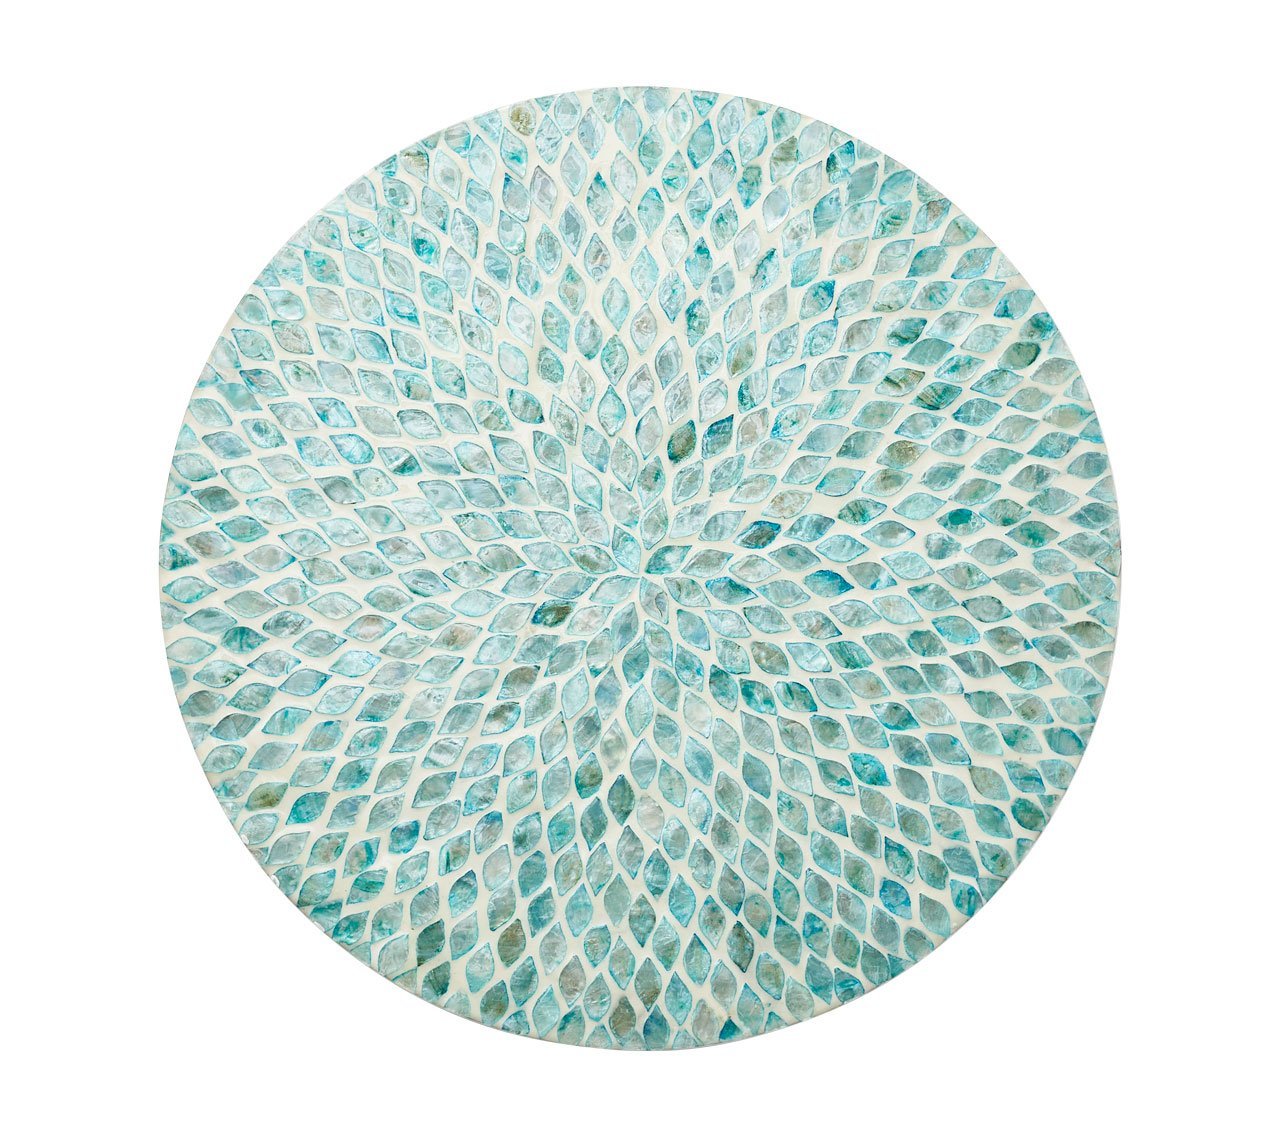 Marquis Placemat made of seafoam-colored capiz shells